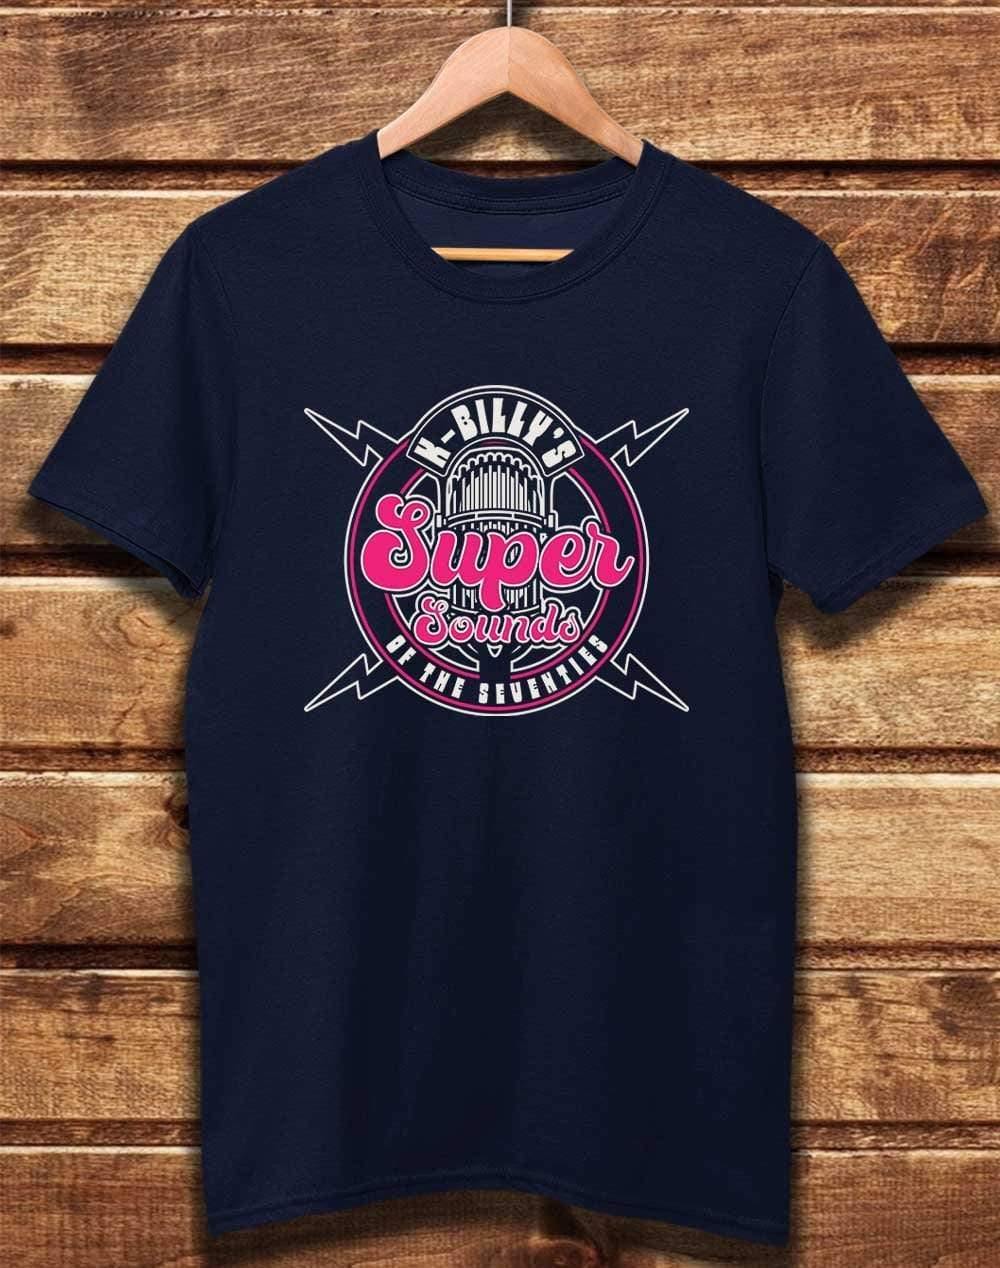 DELUXE K-Billy's Super Sounds Organic Cotton T-Shirt XS / Navy  - Off World Tees